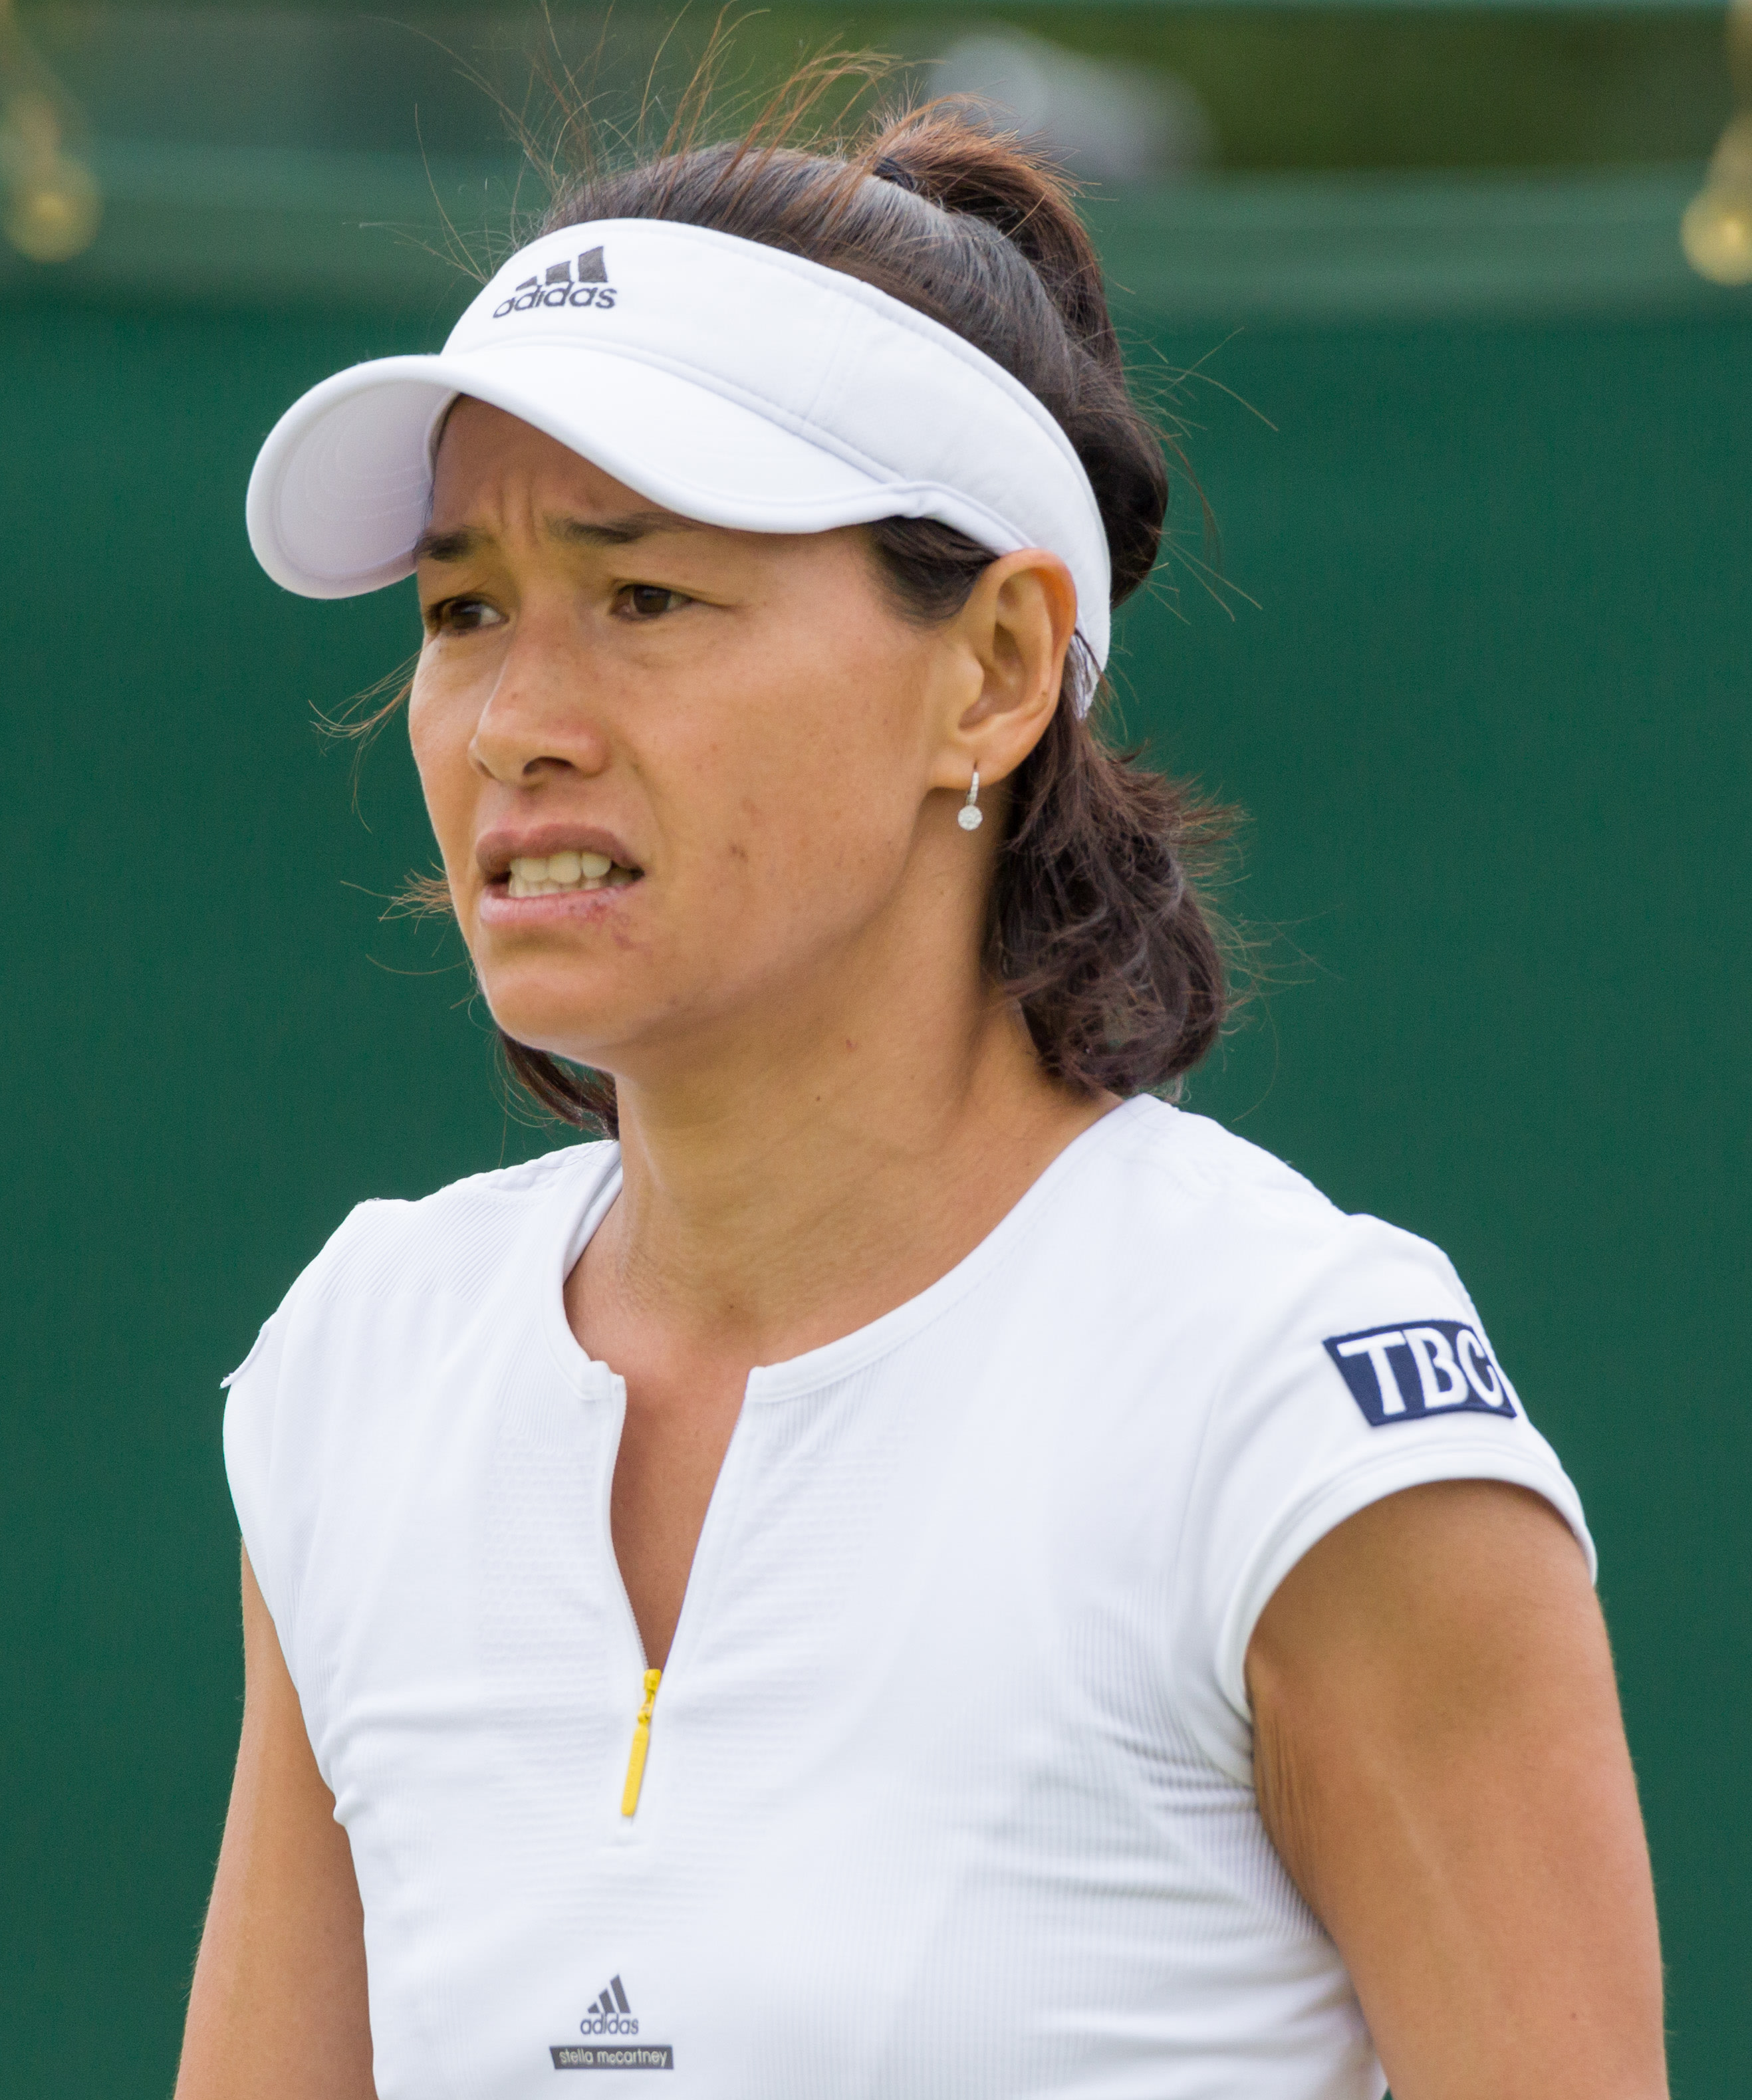 Ahead Of Comeback Ageless Kimiko Date Krumm Files For Divorce After 16 Years Of Marriage